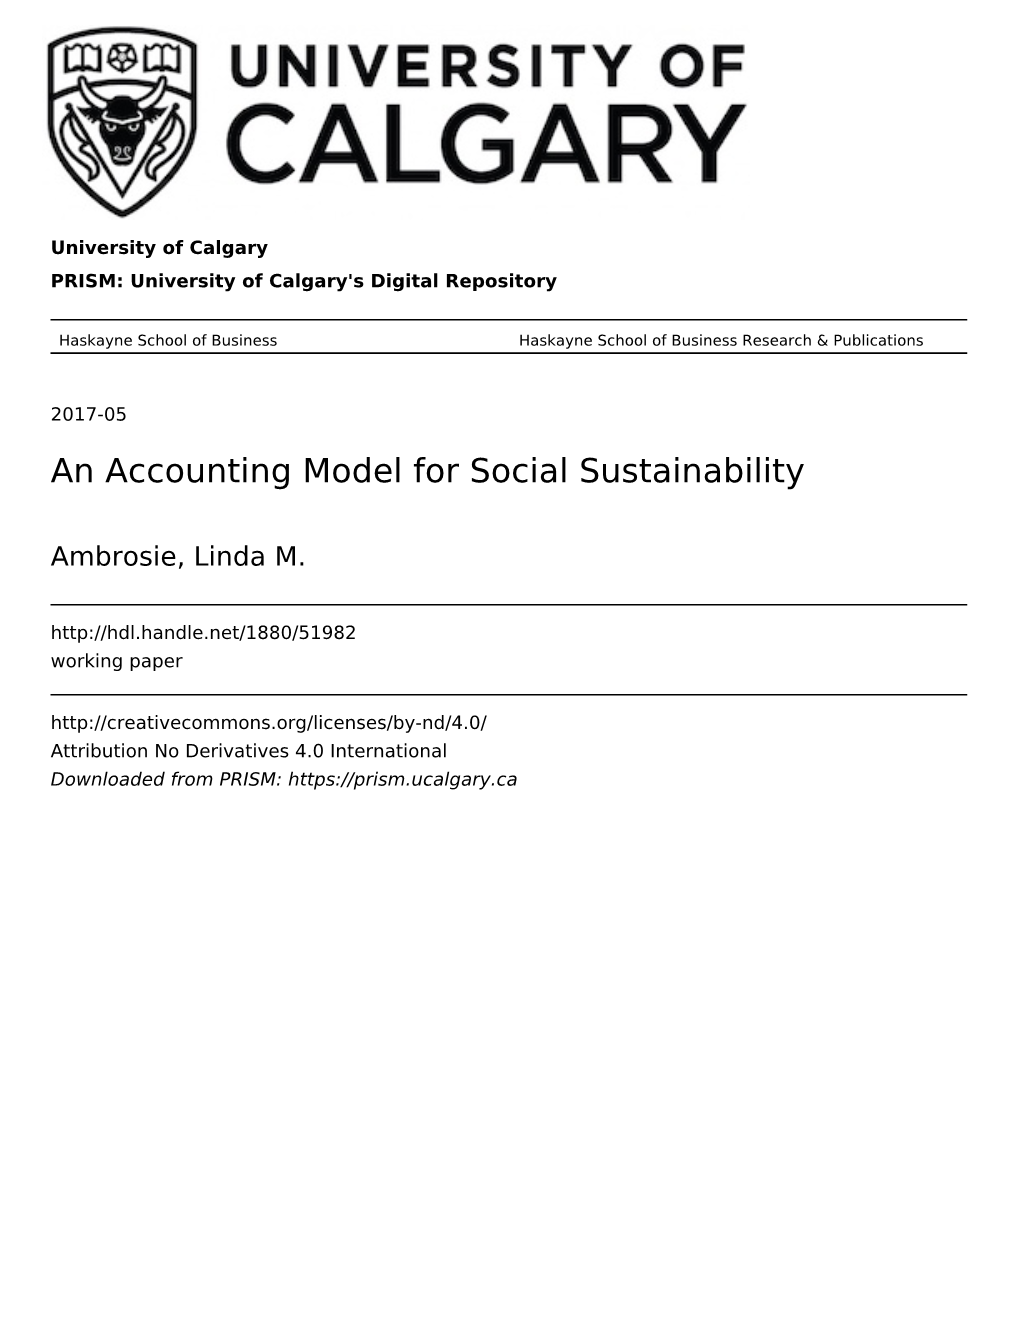 An Accounting Model for Social Sustainability the Case of the Banff